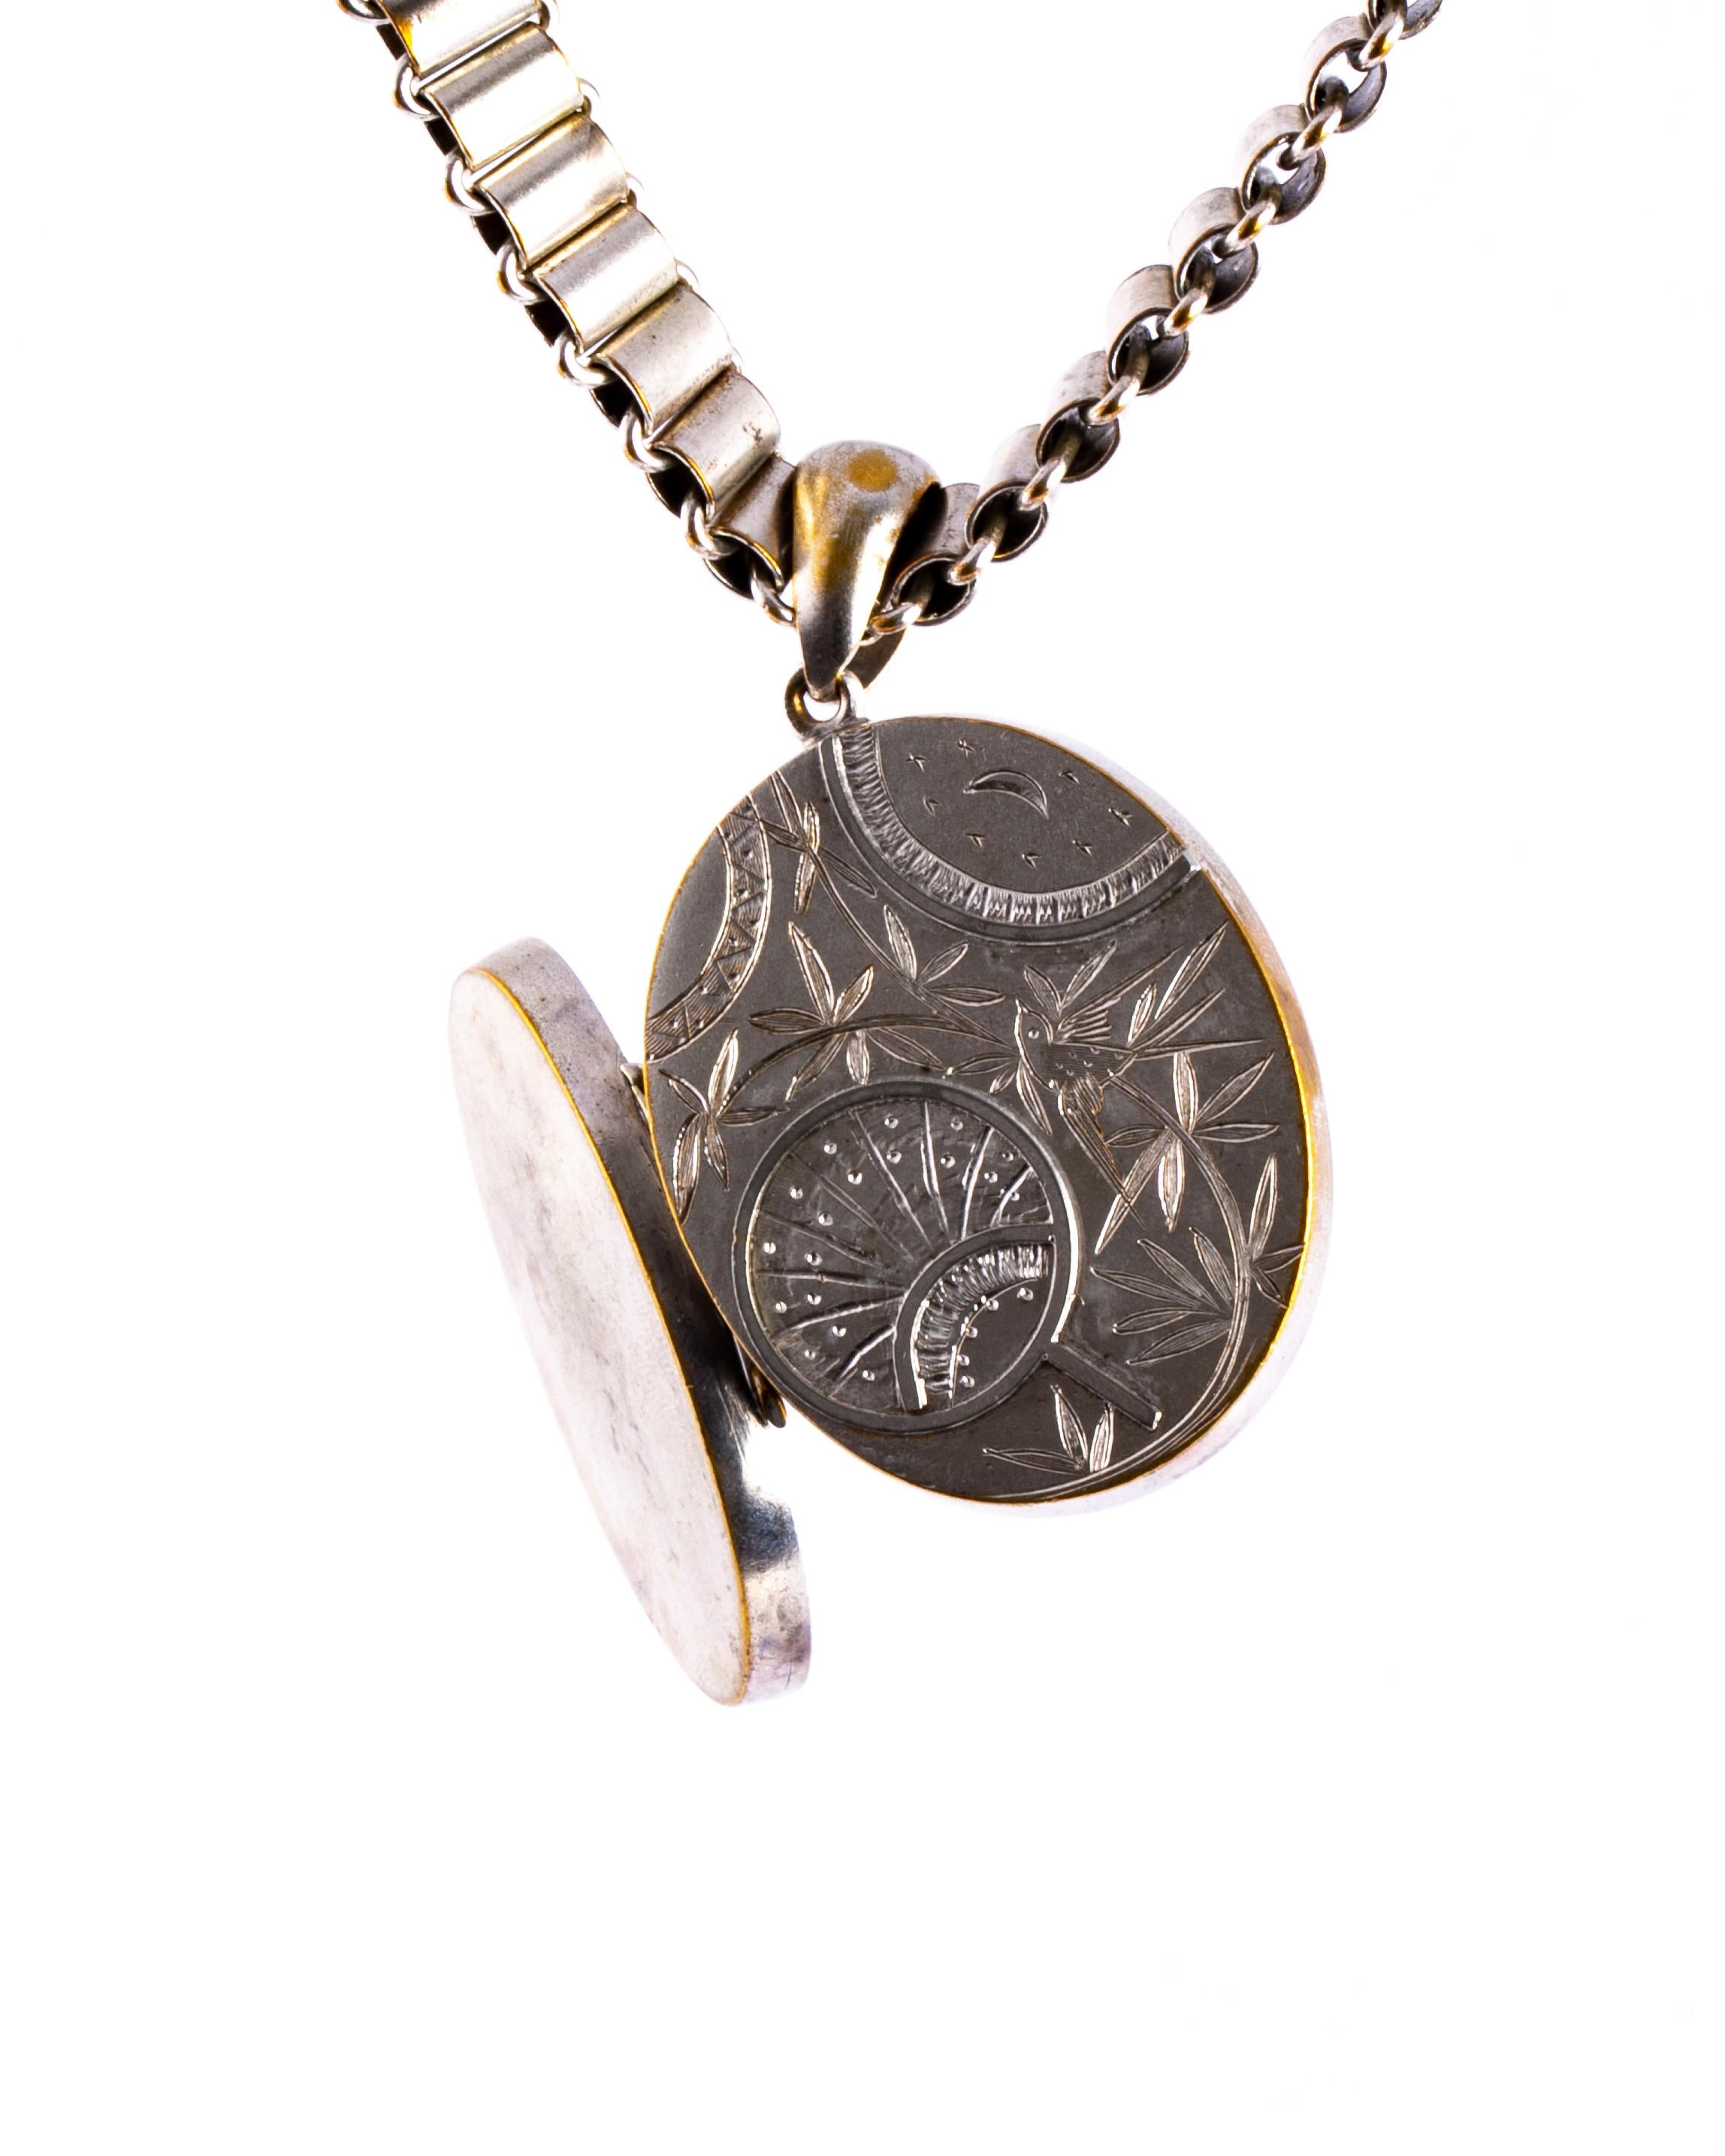 This wonderful locket has engraving of a sunrise with a bird and leaf motif surrounding it. The back of the locket is plain glossy silver. The collar is simple and made up of smooth rolls of silver.  

Locket Dimensions: 43mm x 35mm
Chain length: